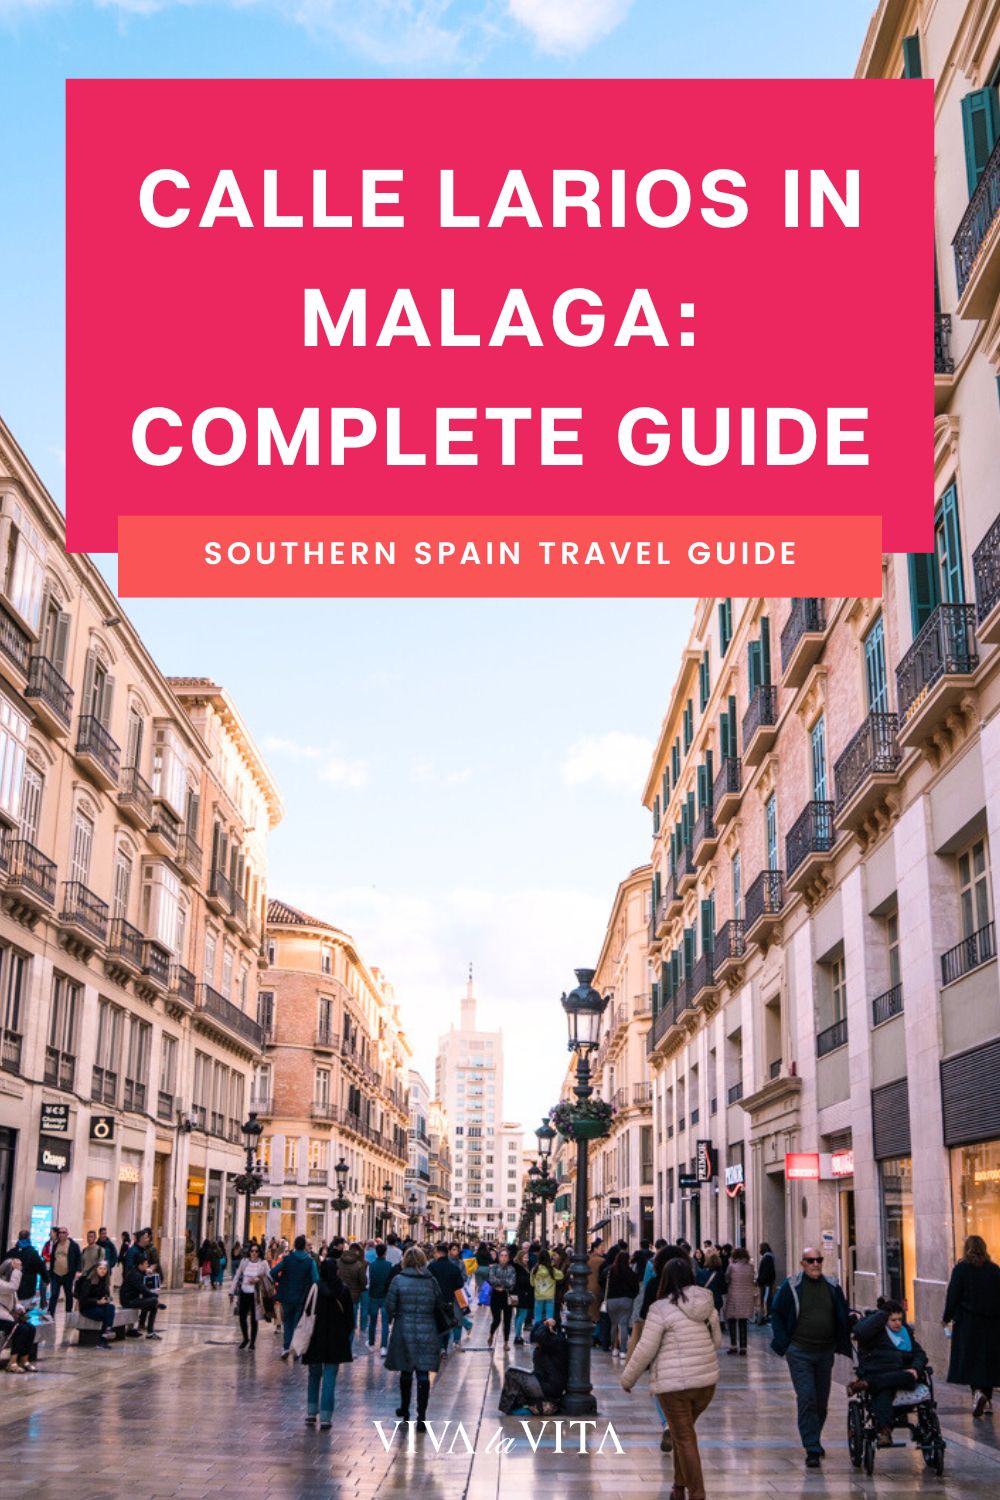 pinteresti image showing the Calle Larios in Malaga, Southern Spain with a headline: calle Larios in Malaga, Complete Guide - Southern Spain travel guide